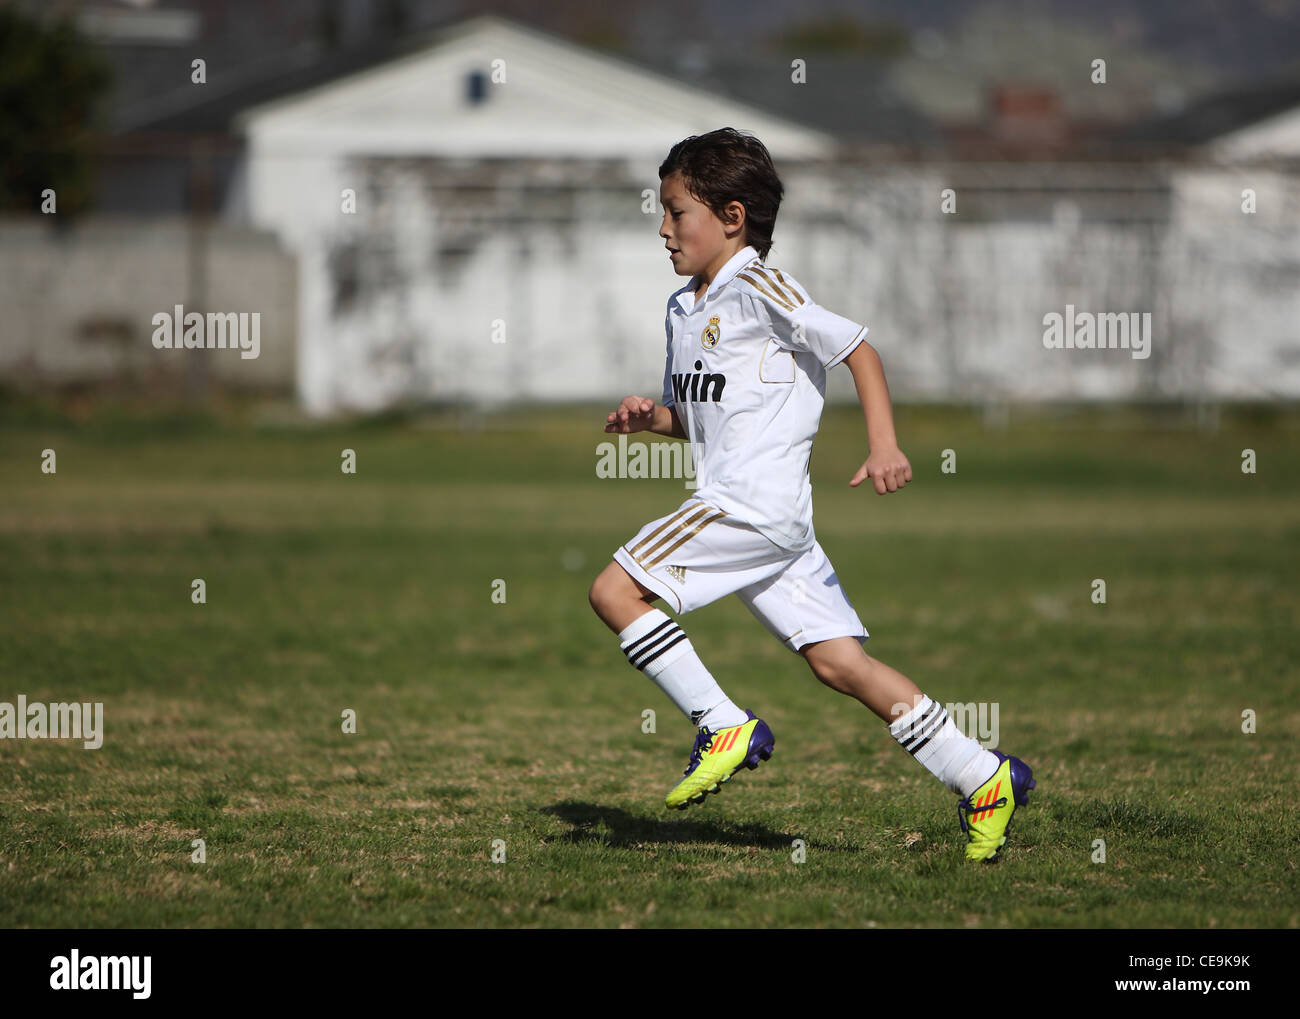 Young boy dressed in Real Madrid uniform practices soccer for a youth team in Southern California.  Soccer is becoming popular. Stock Photo